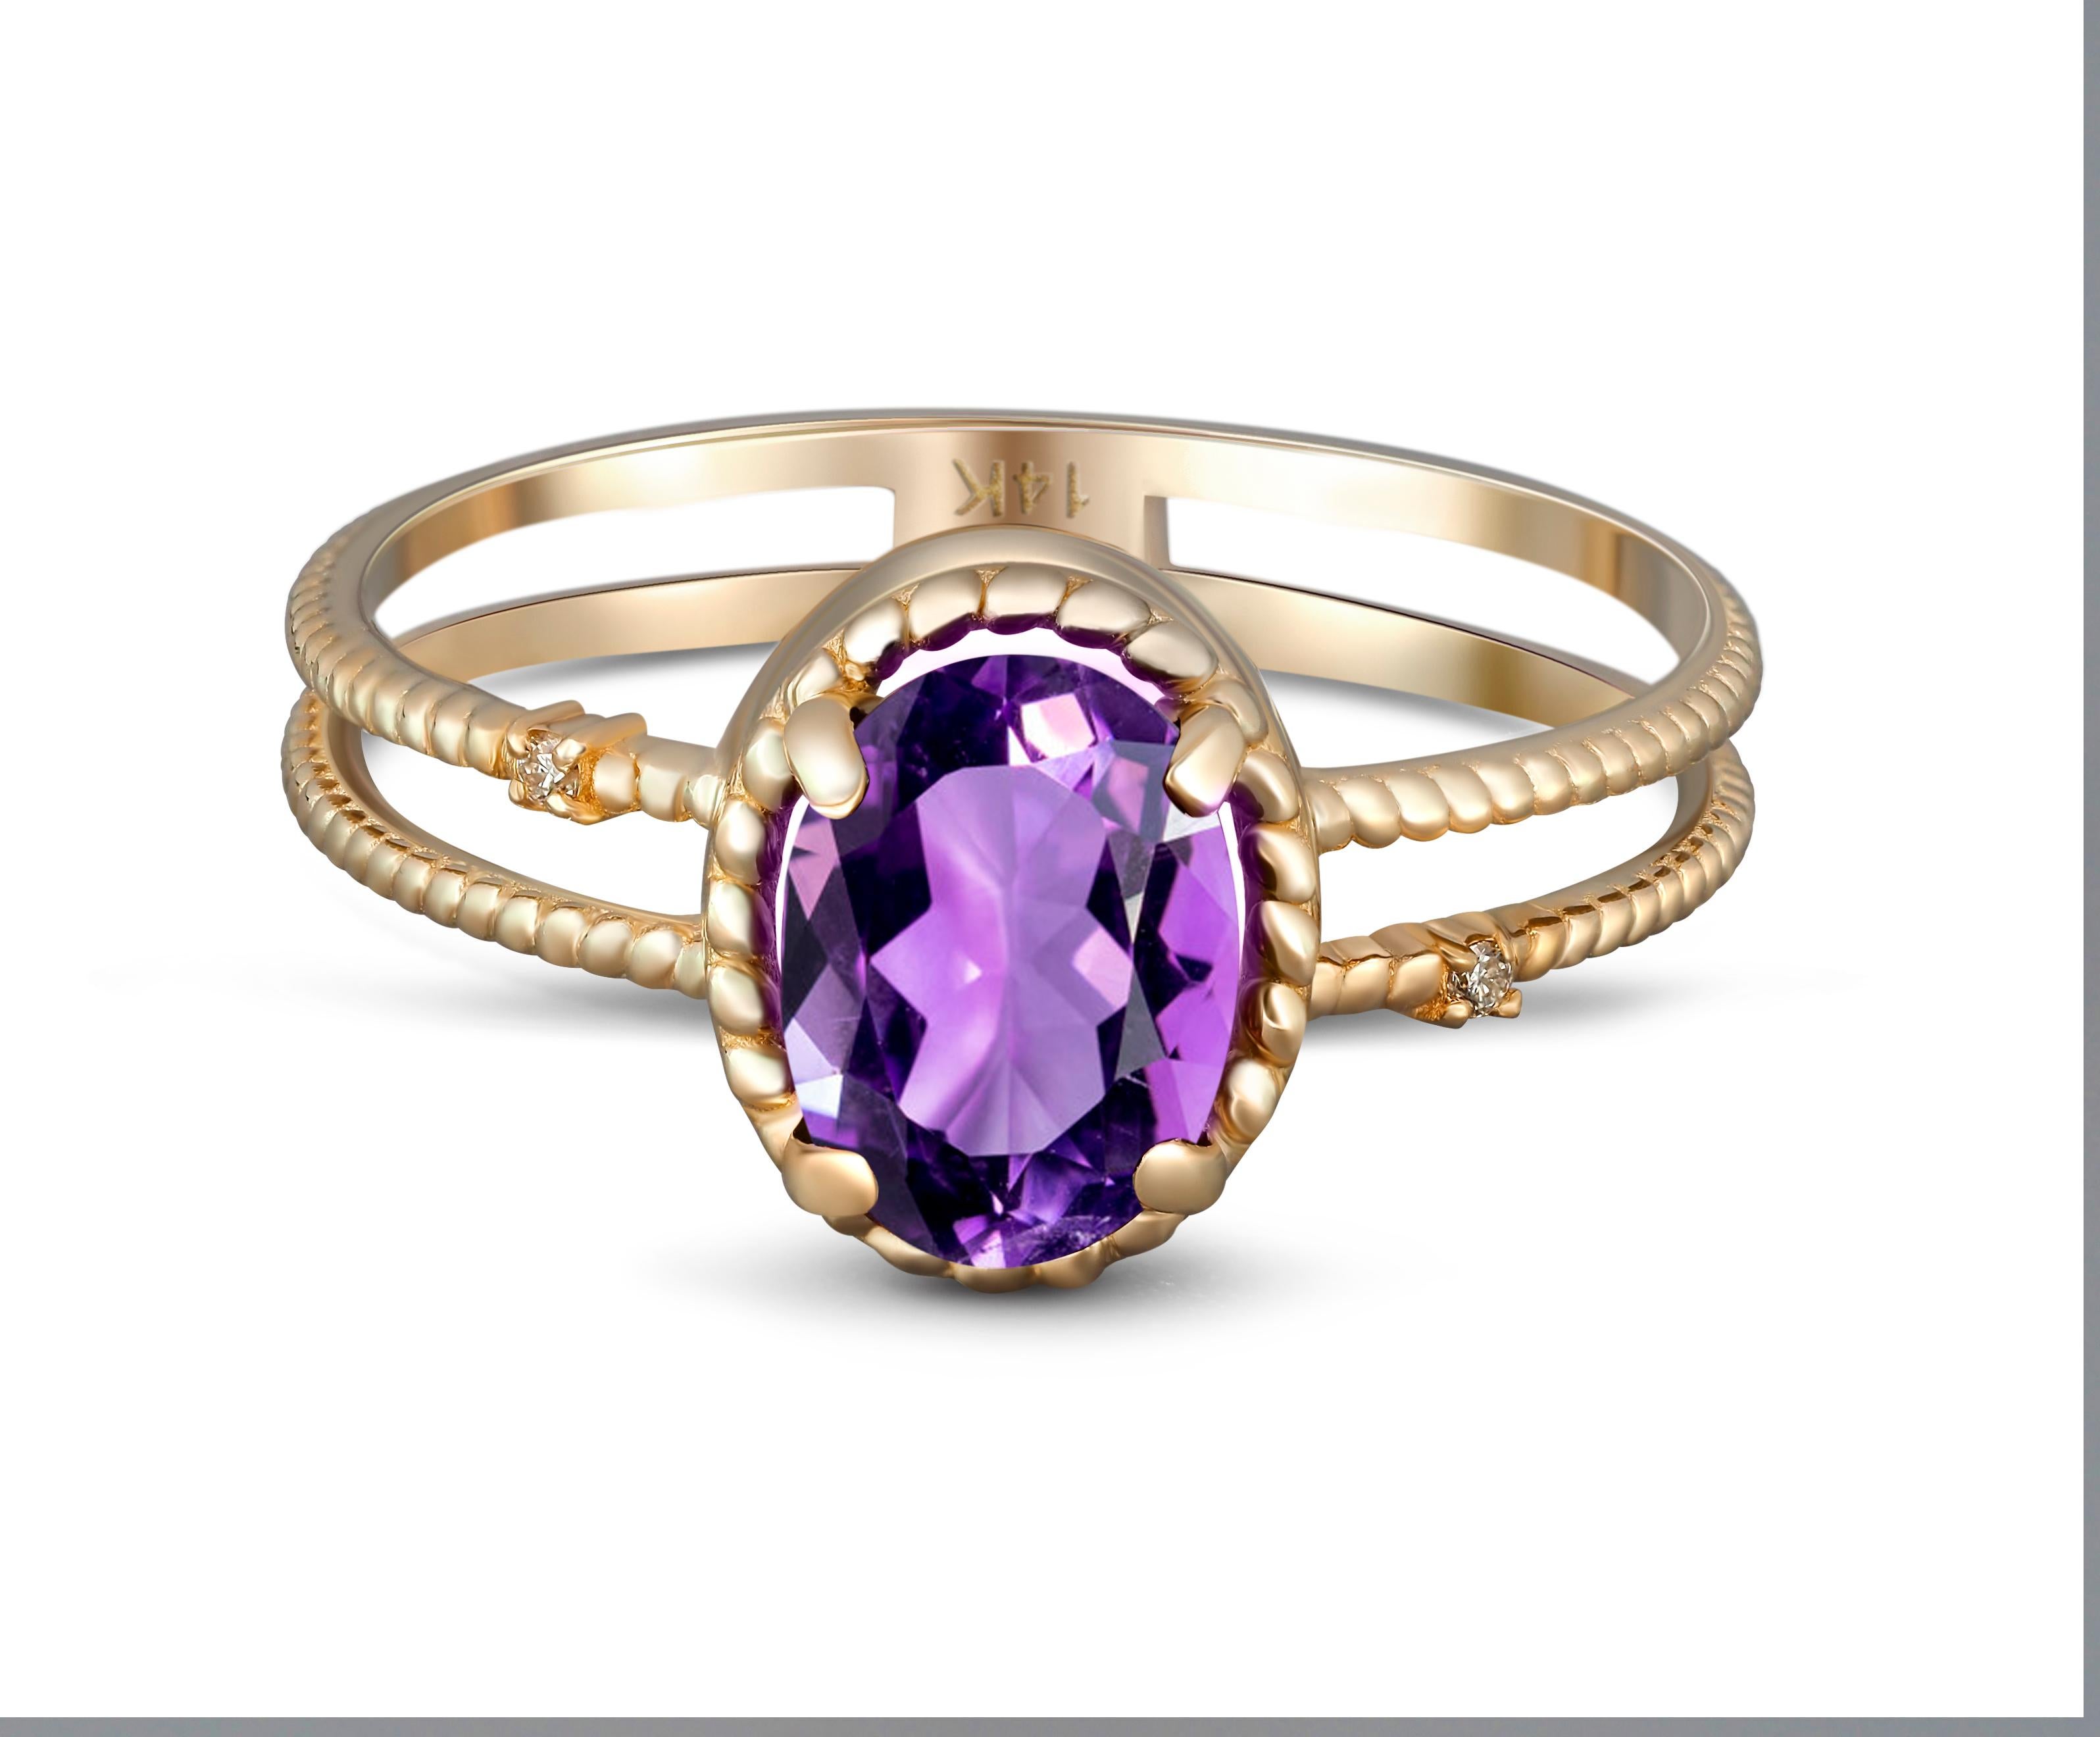 Amethyst 14k Gold ring. 
Oval Amethyst Ring. Minimalist Amethyst Ring. Amethyst Engagement ring. Purple gem ring. February Birthstone Ring

Metal: 14k gold
Weight: 1.8  g. depends from size.

Central stone: natural amethyst
Weight -  approx 1 ct in